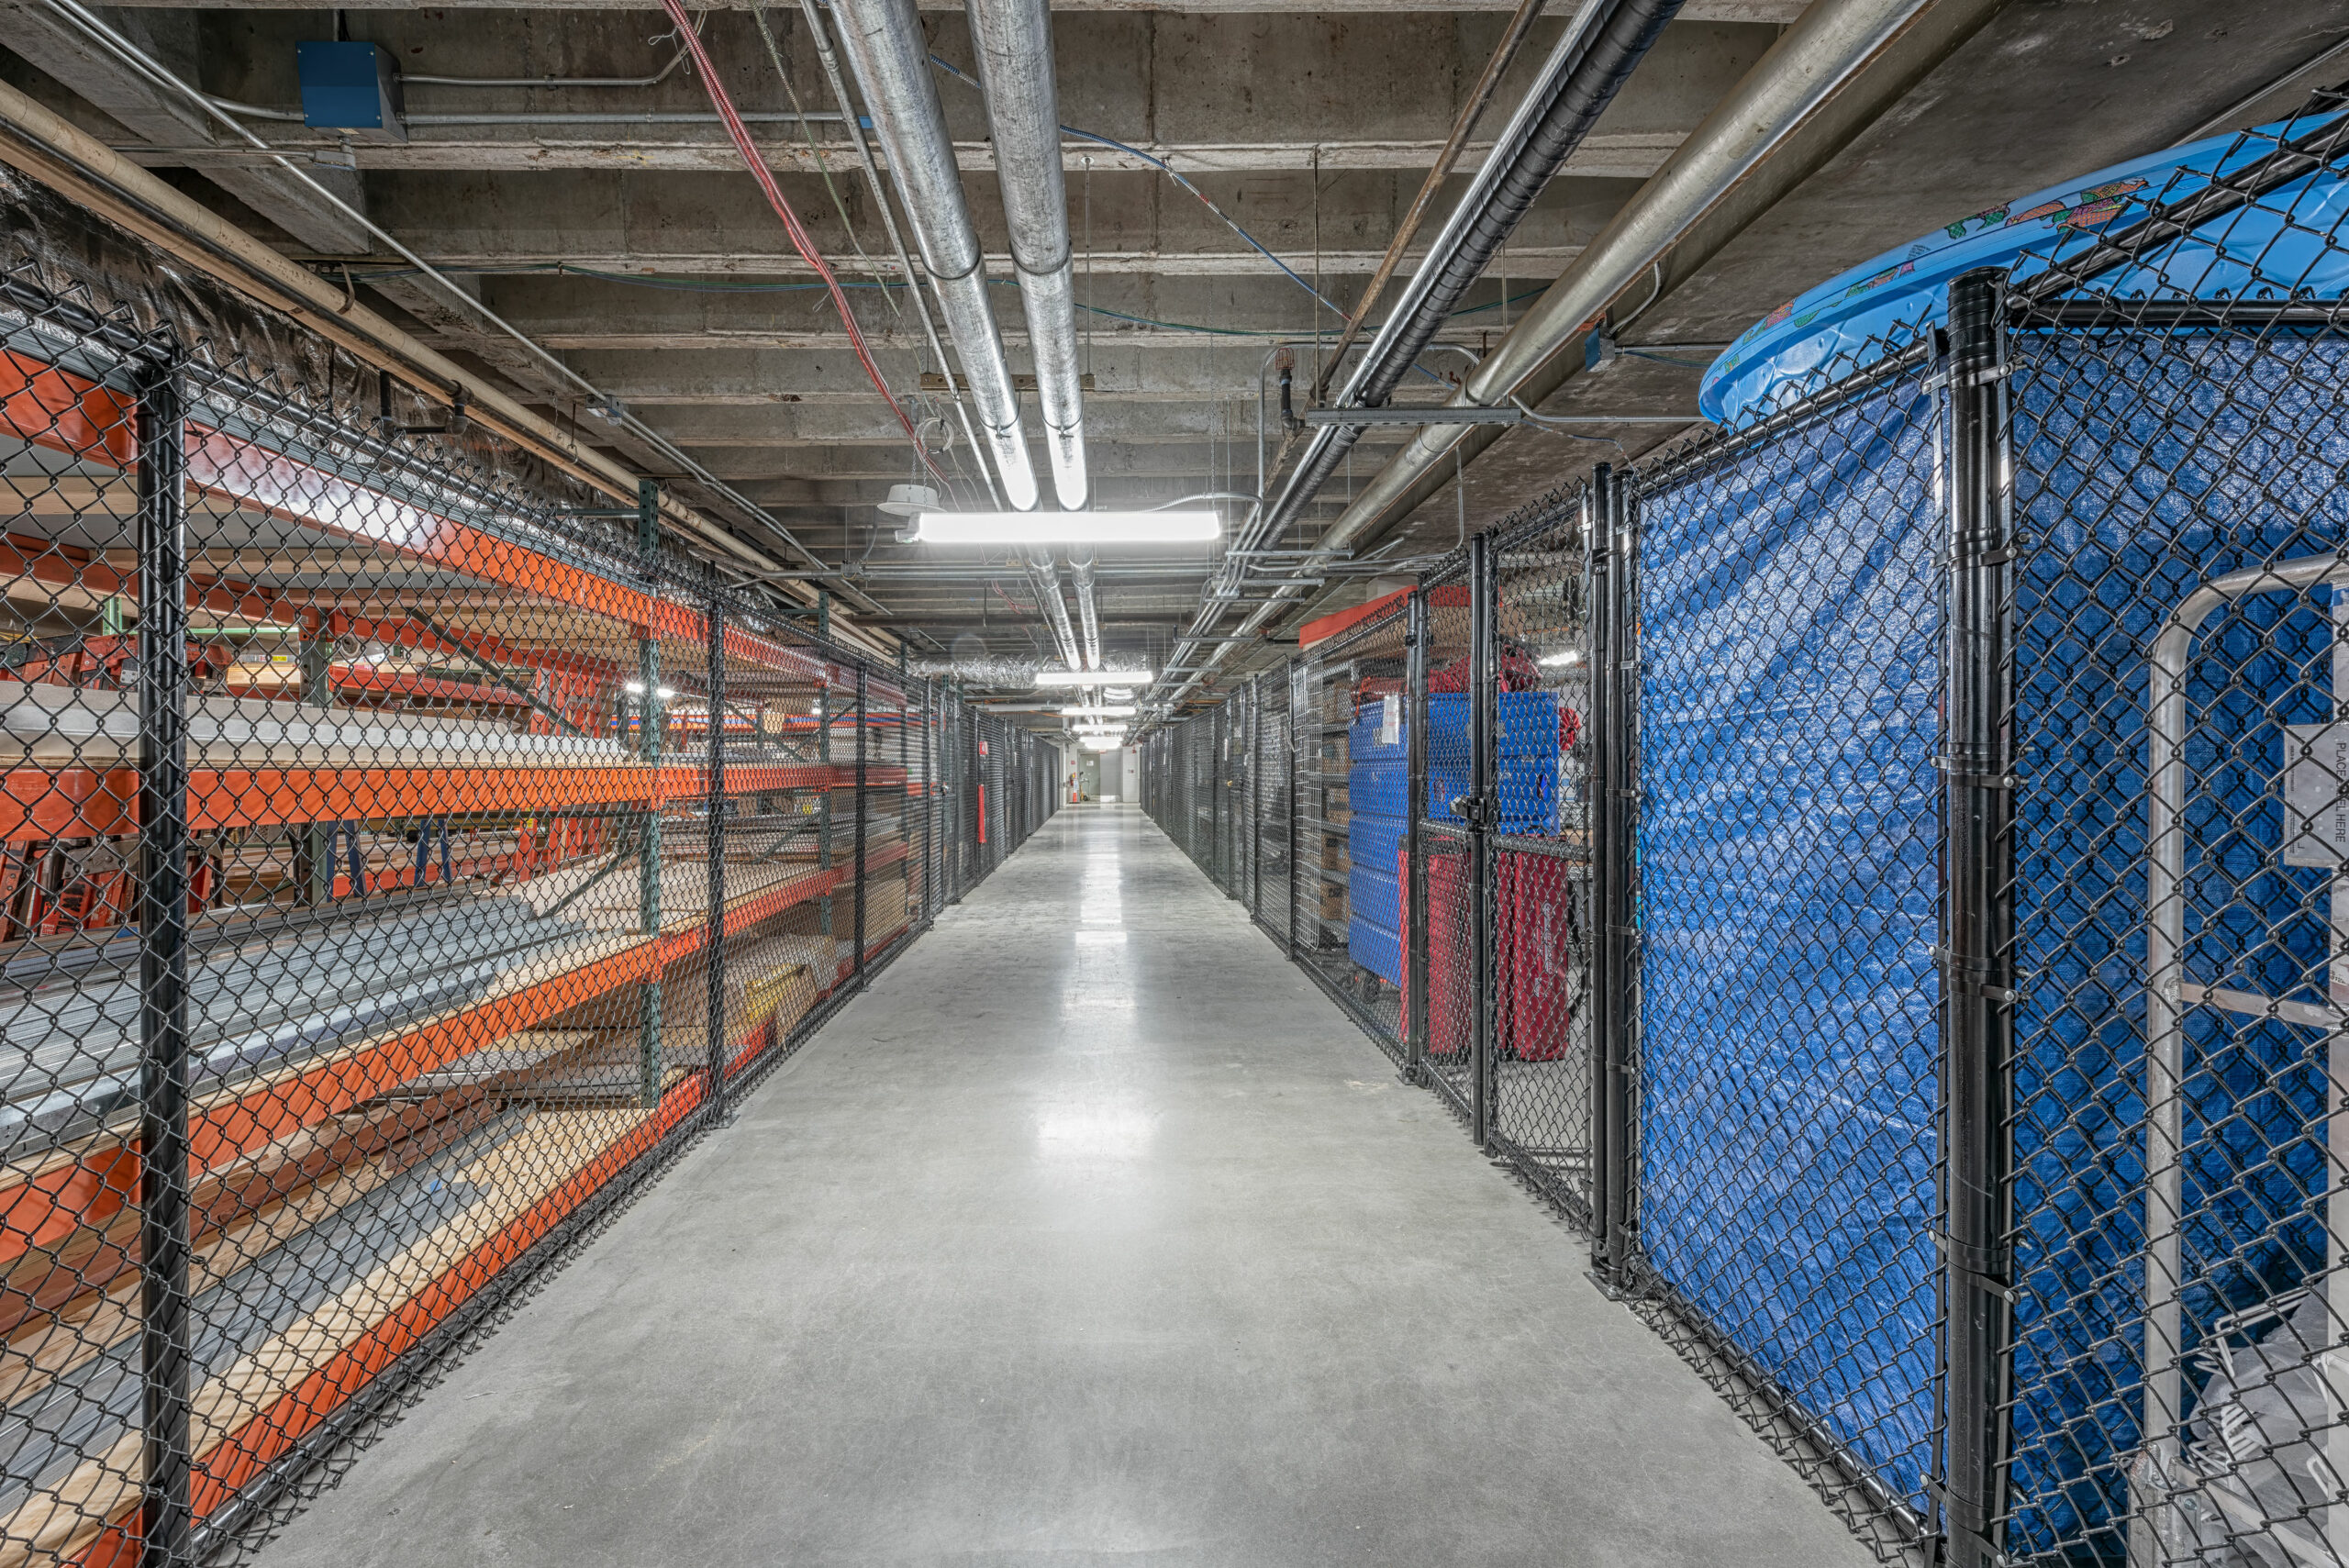 WISE DELIVERS NEW CENTRAL STORAGE FACILITY FOR NEWTON-WELLESLEY HOSPITAL